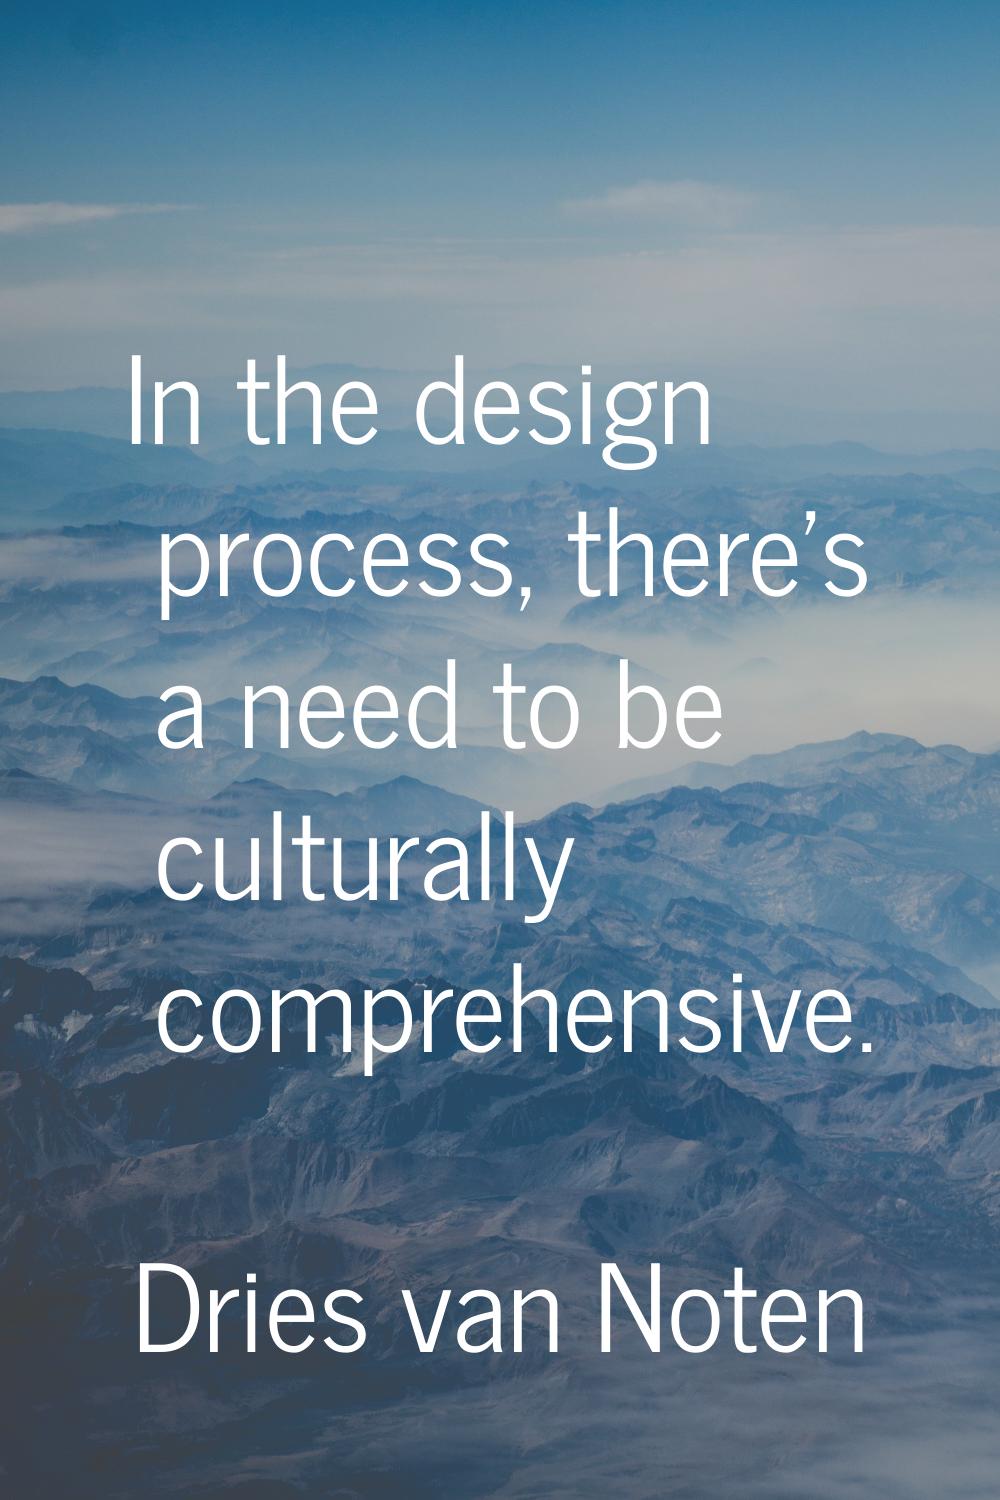 In the design process, there's a need to be culturally comprehensive.